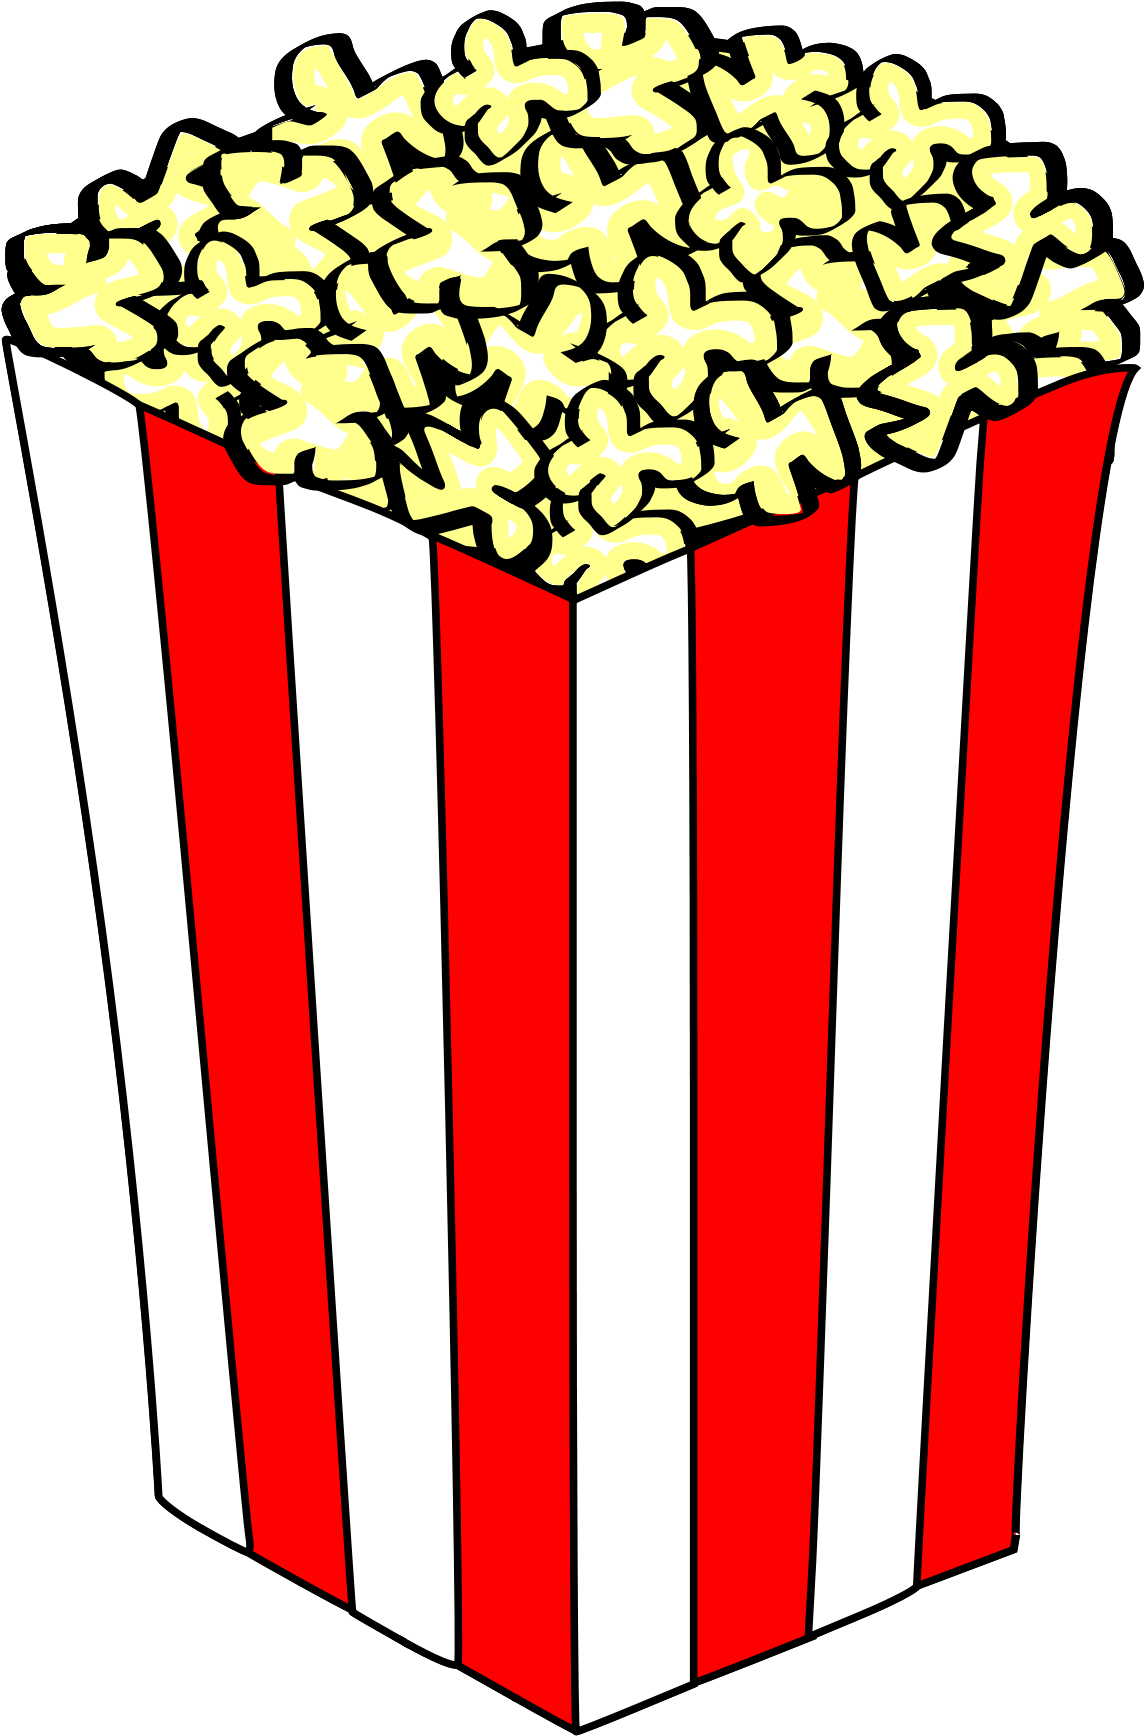 Clipart Of Popcorn Panda Free Images - Popcorn In A Box (1697x2400)